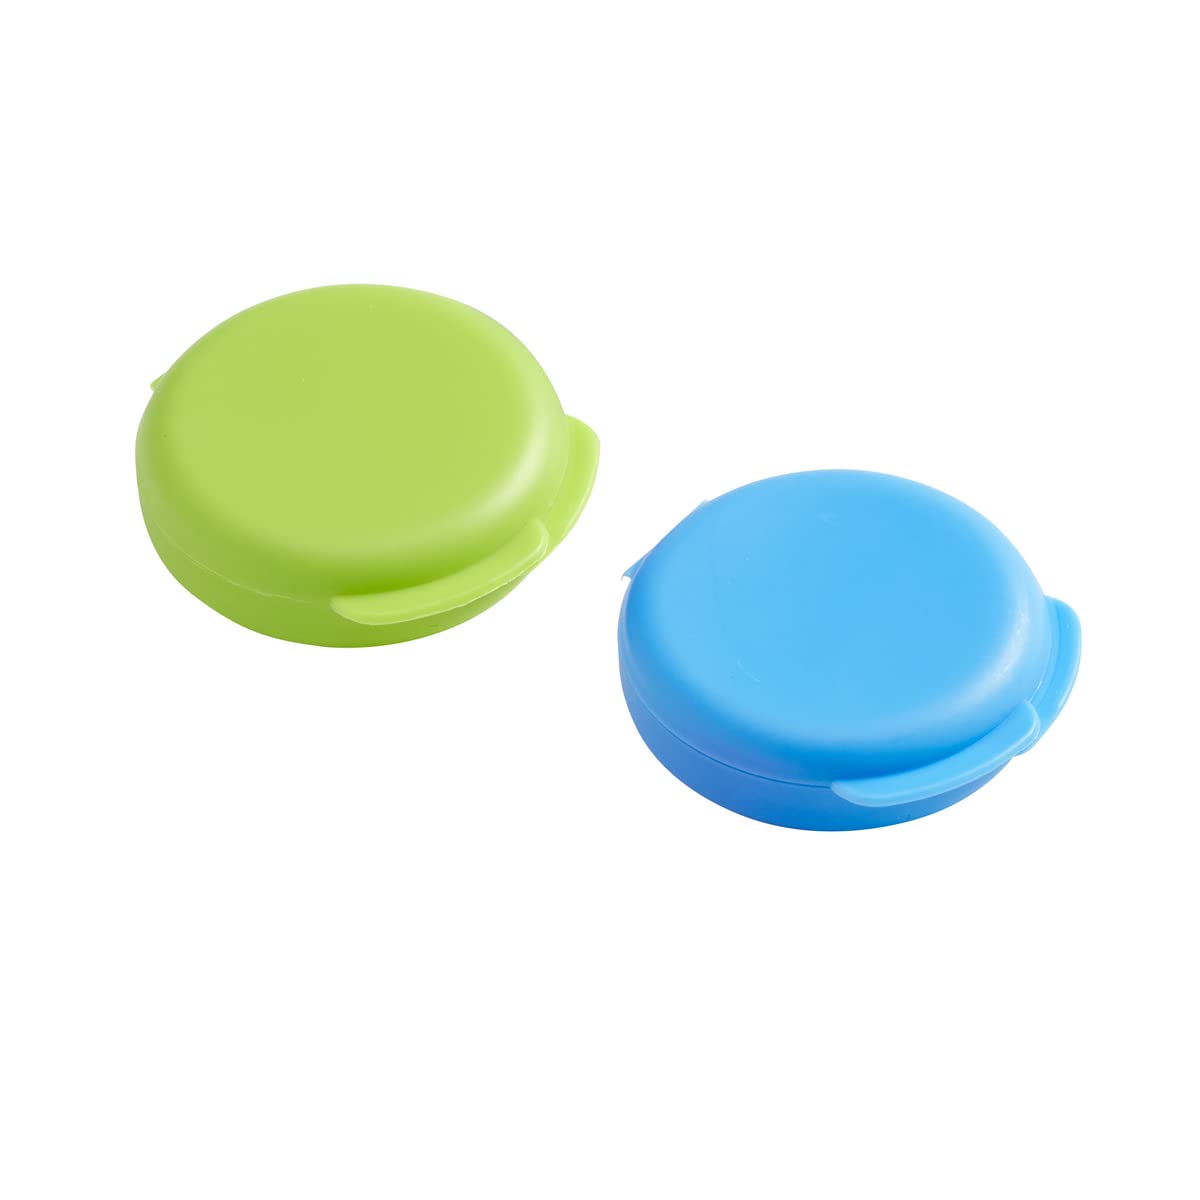 EZY DOSE Daily Round, Portable On-The-Go, Pill Box, Organizer and Vitamin Containers, Snap Shut Lids, Perfect for Traveling, Blue and Green, 2 Pack